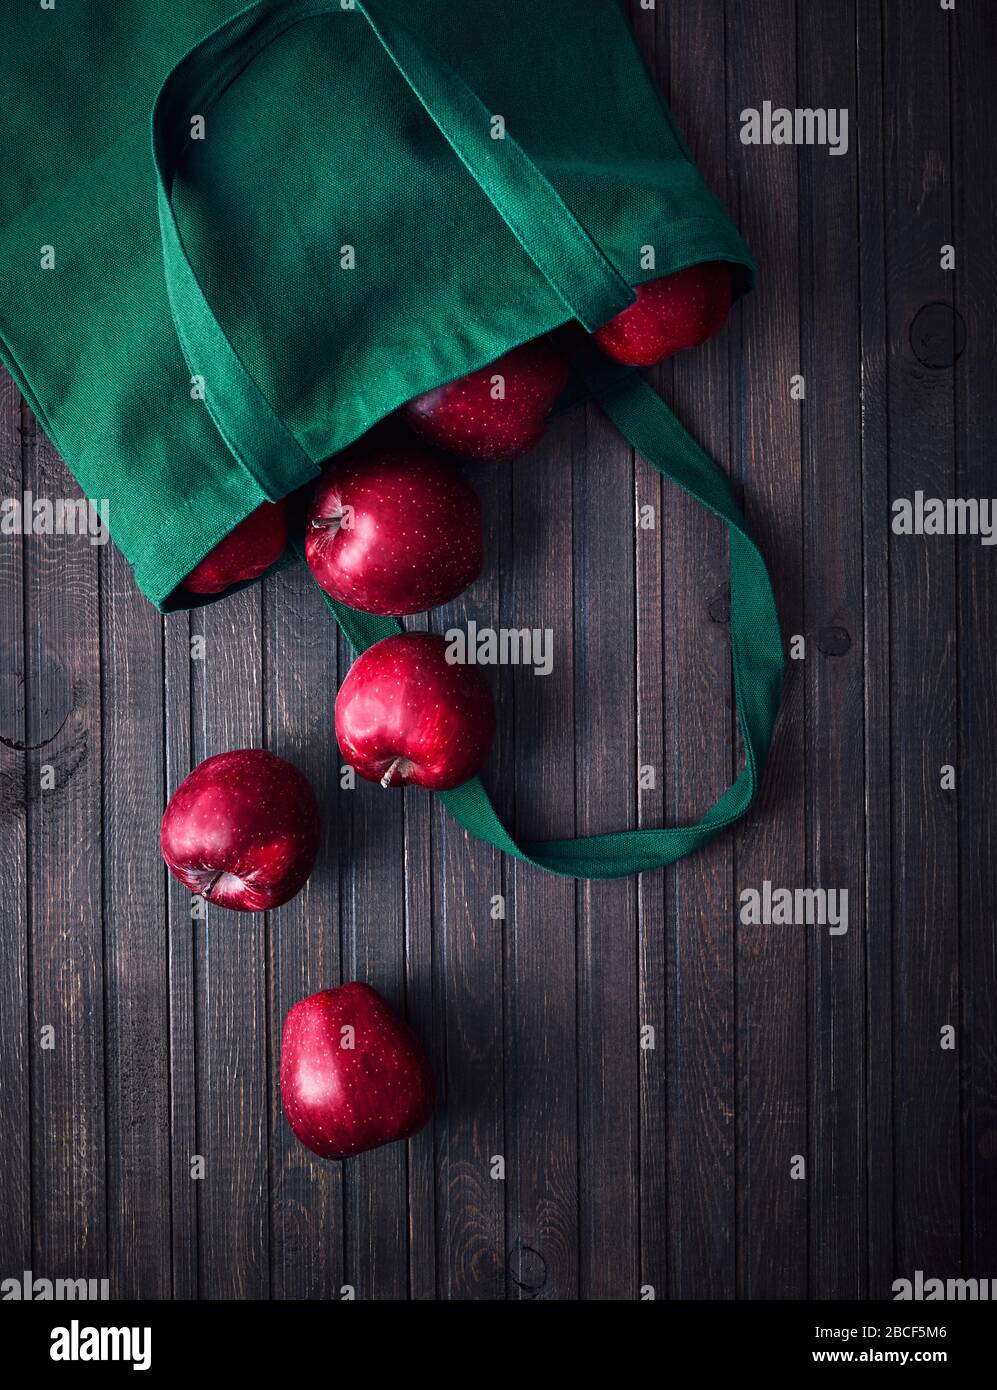 Online shopping delivery. Eco friendly bag with red apples on dark wooden background Stock Photo